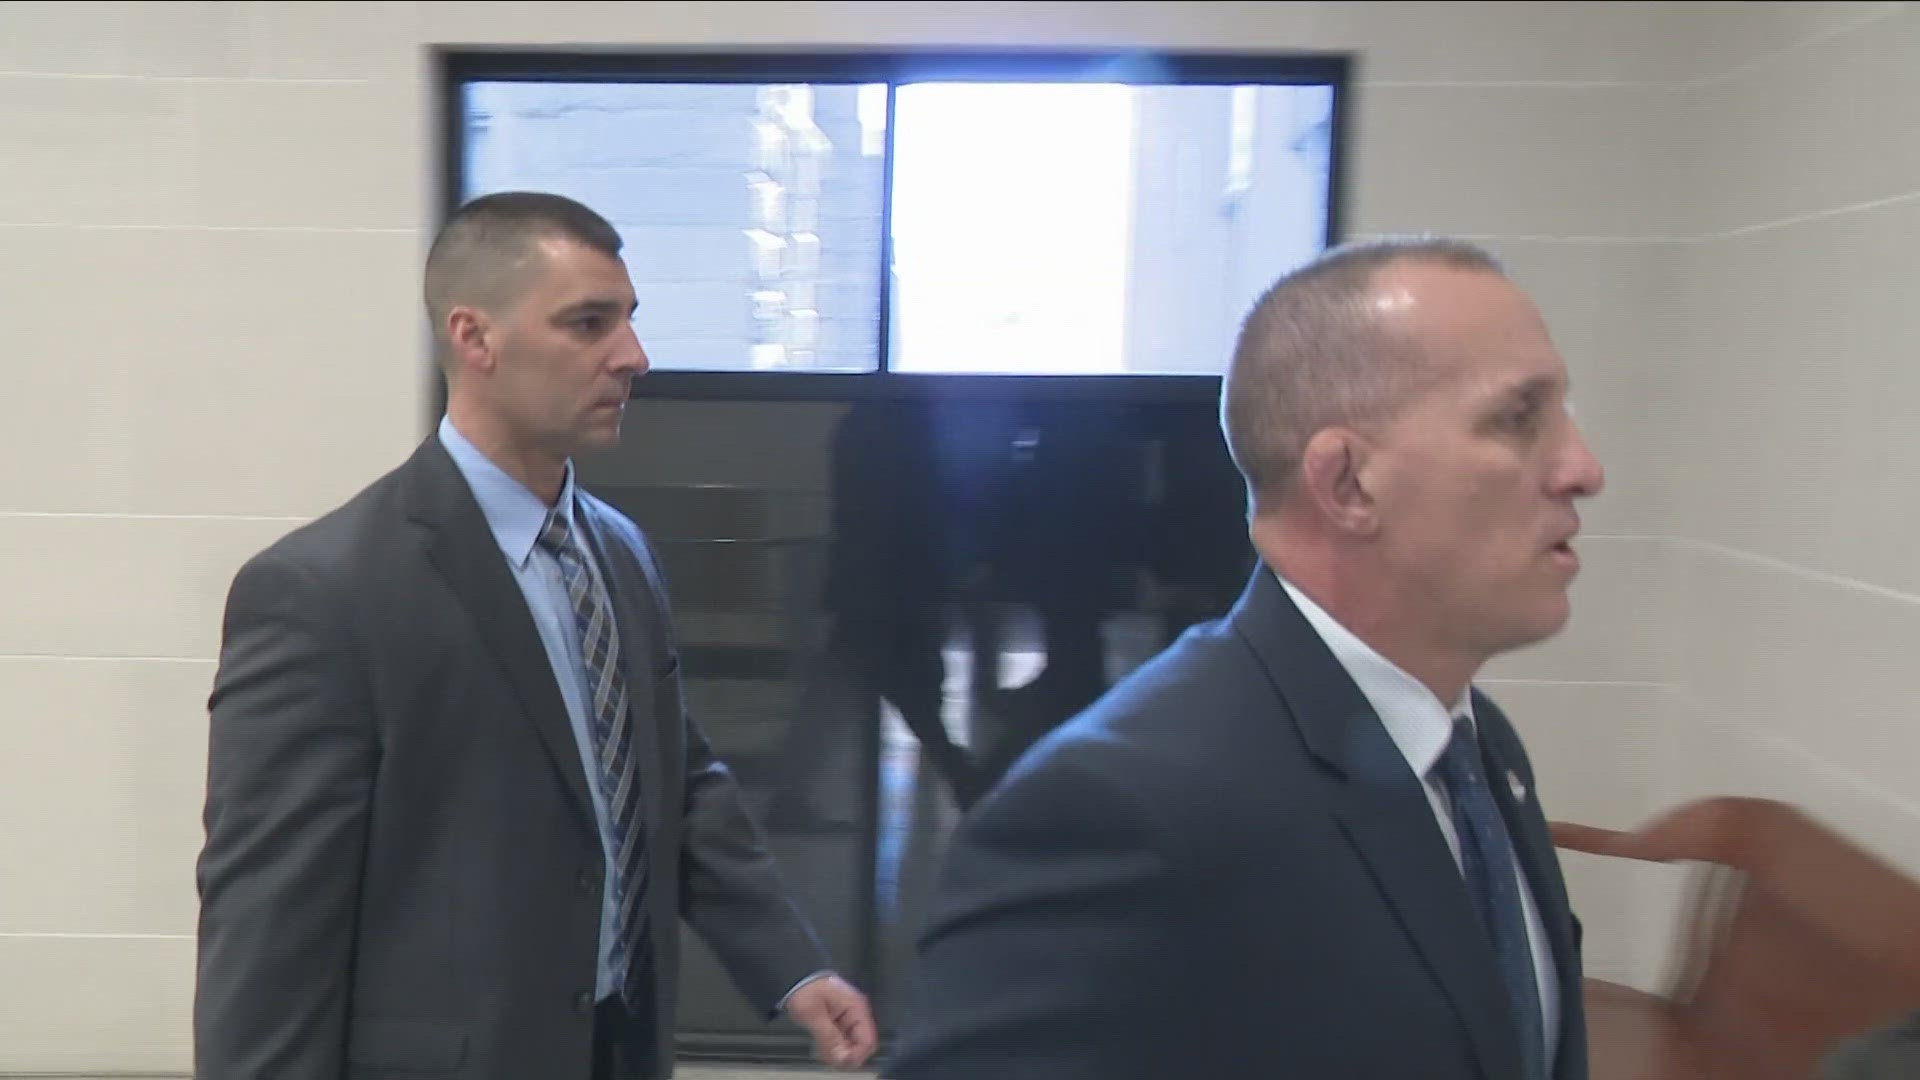 Trooper Anthony Nigro was on trial for manslaughter in connection with the death of a man following a high-speed chase more than two years ago.